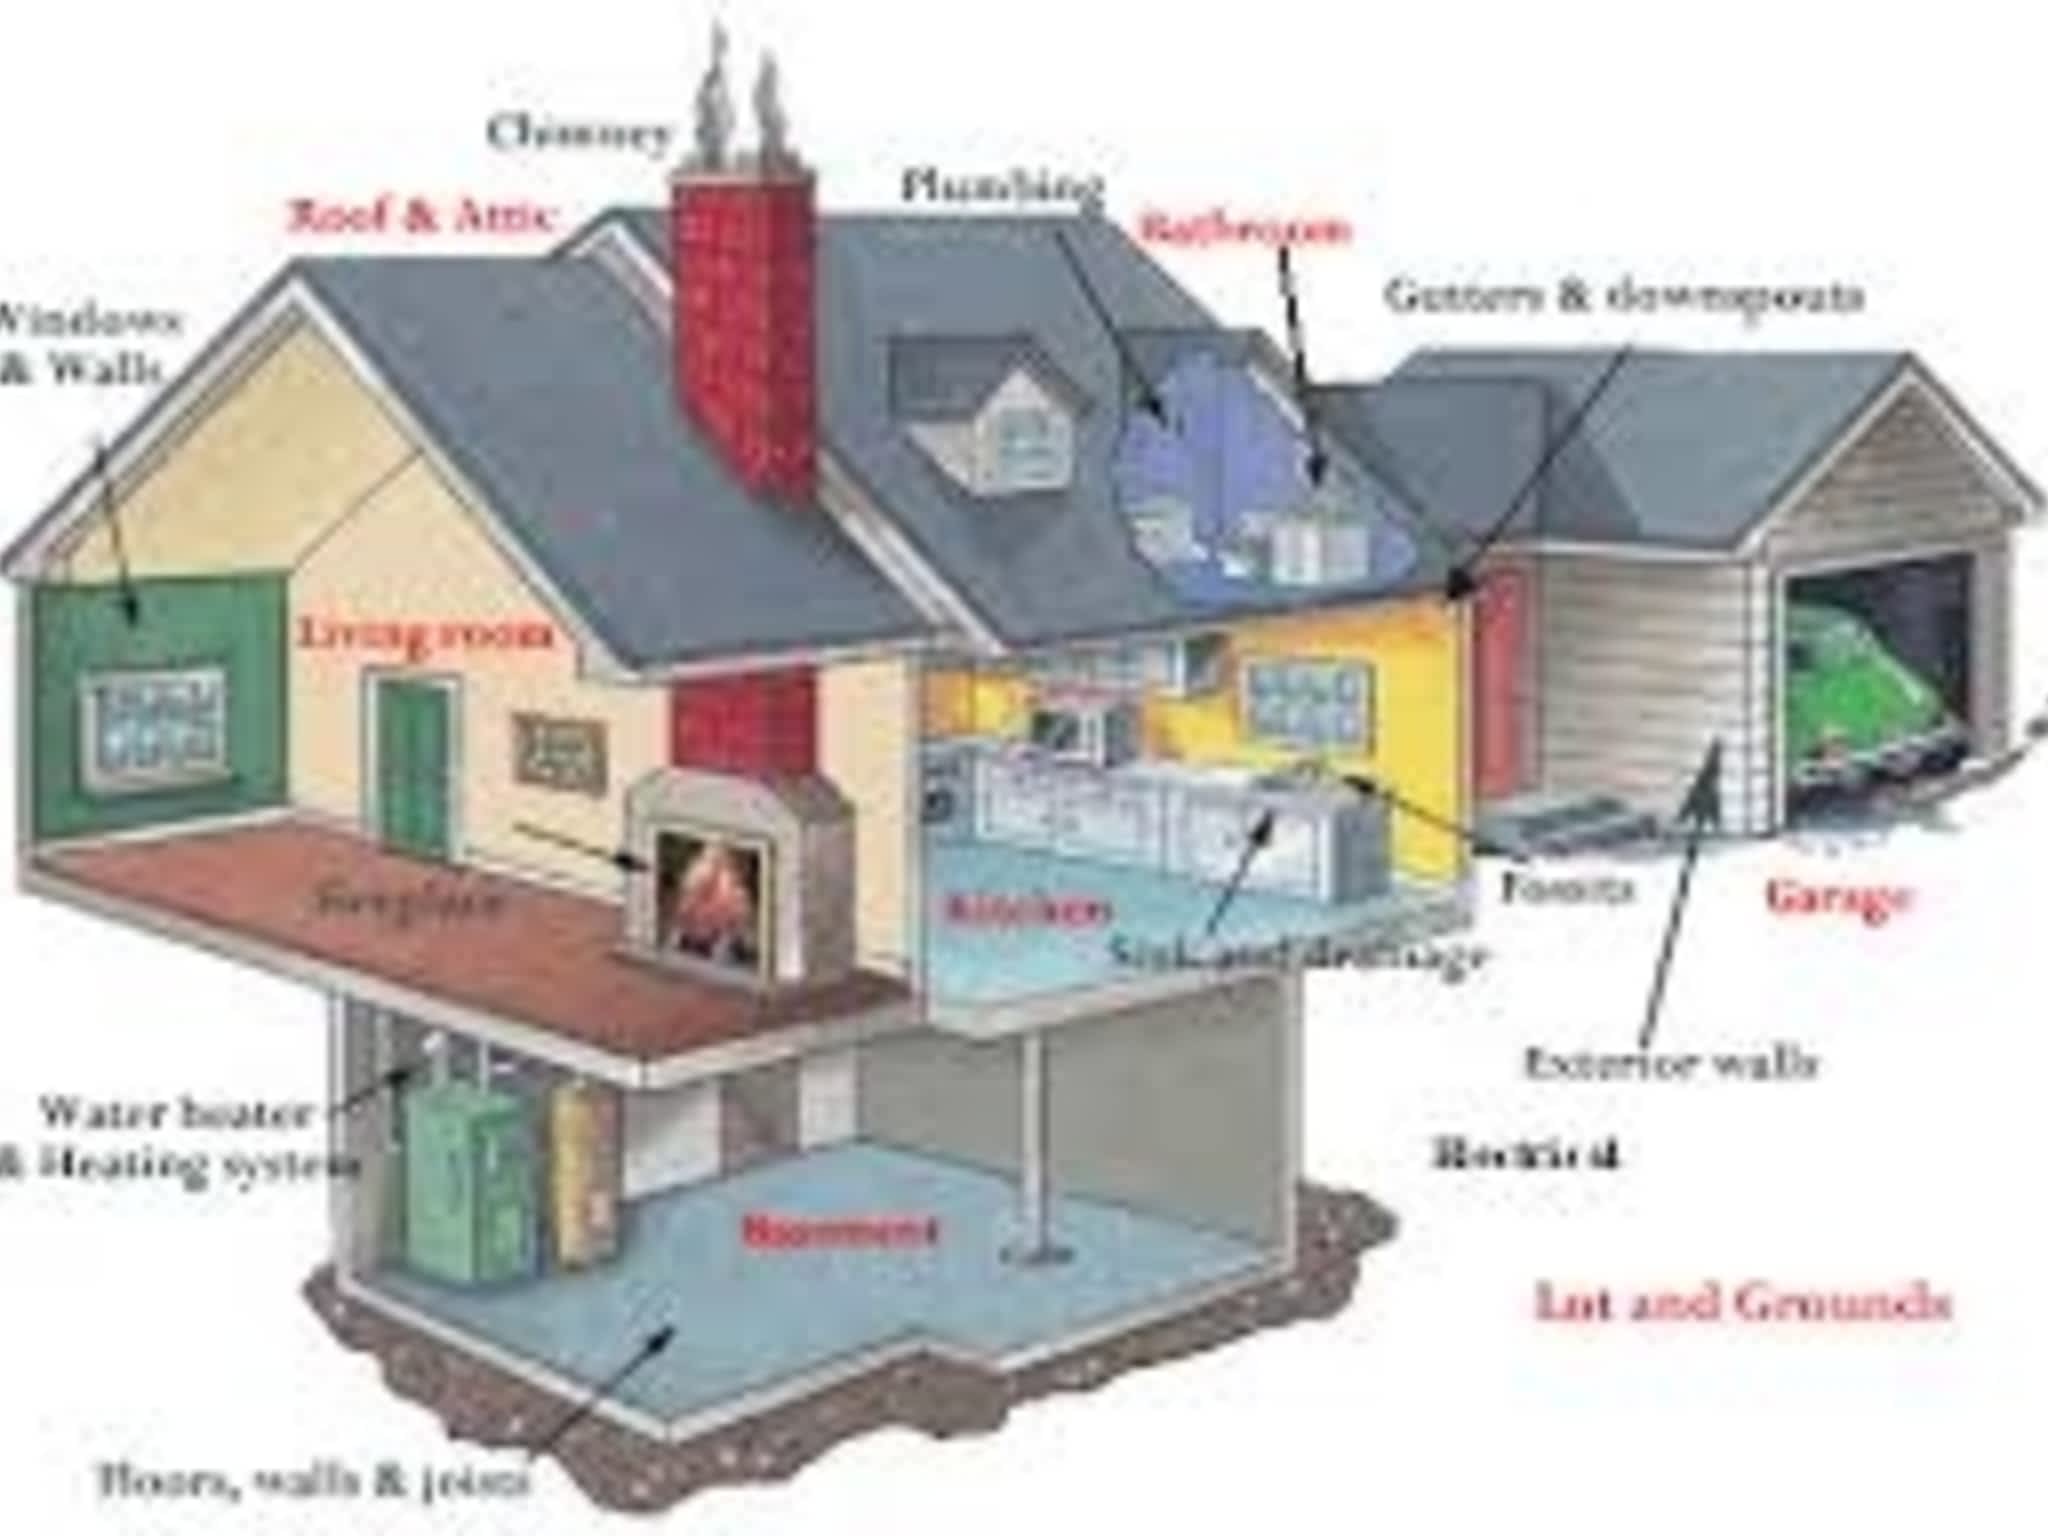 photo Real Home Inspections